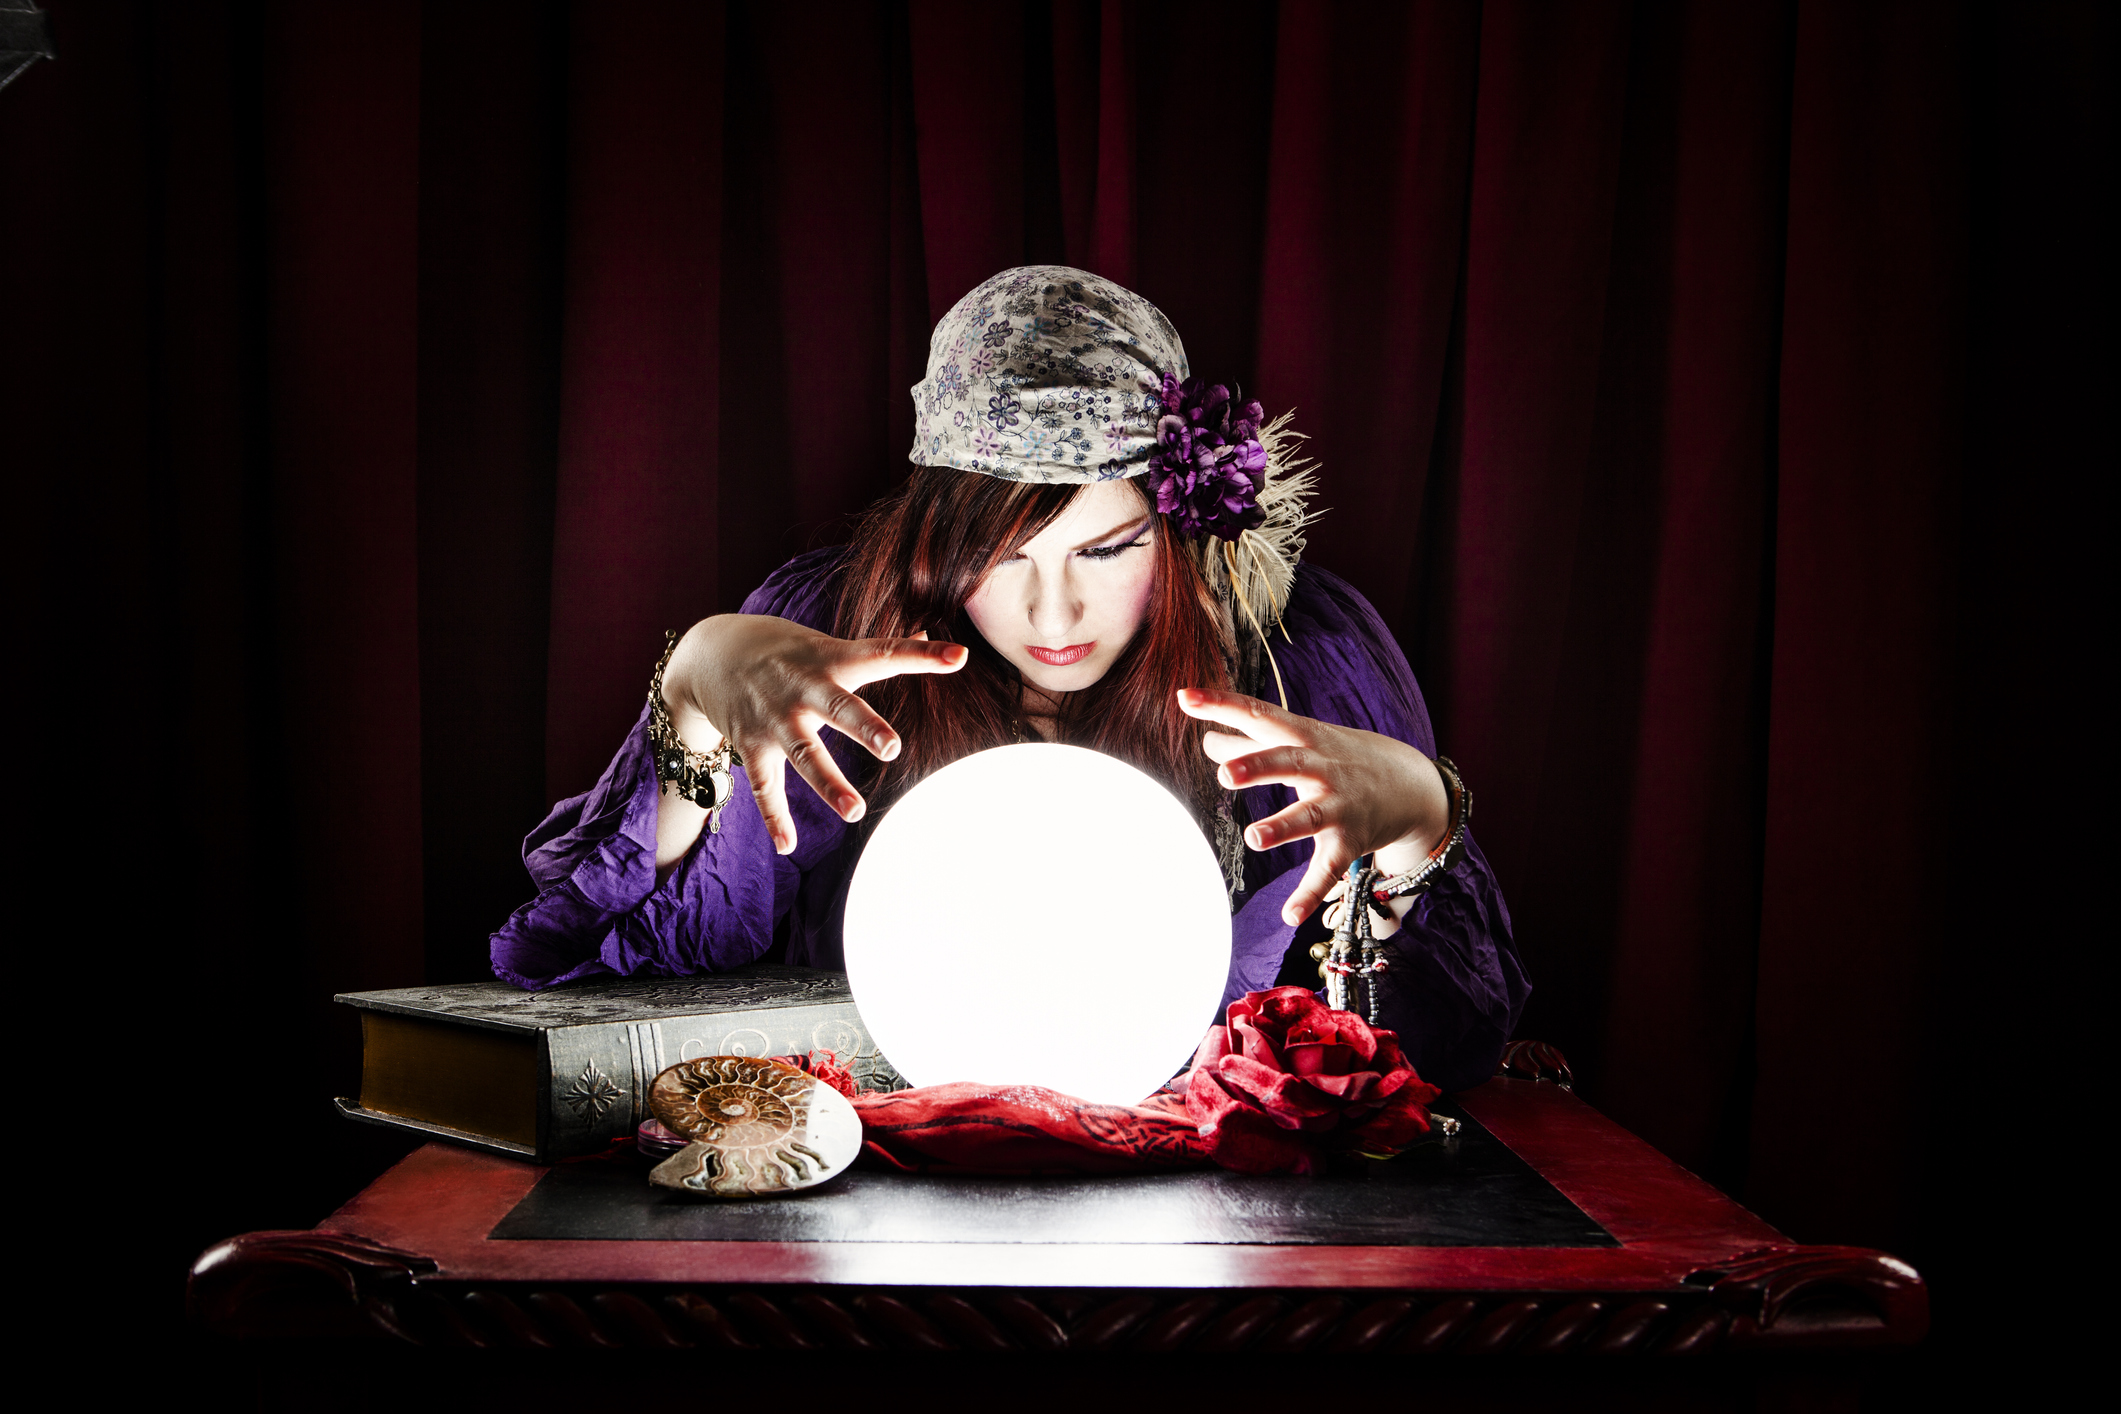 A psychic woman trying to talk to spirit using a crystal ball